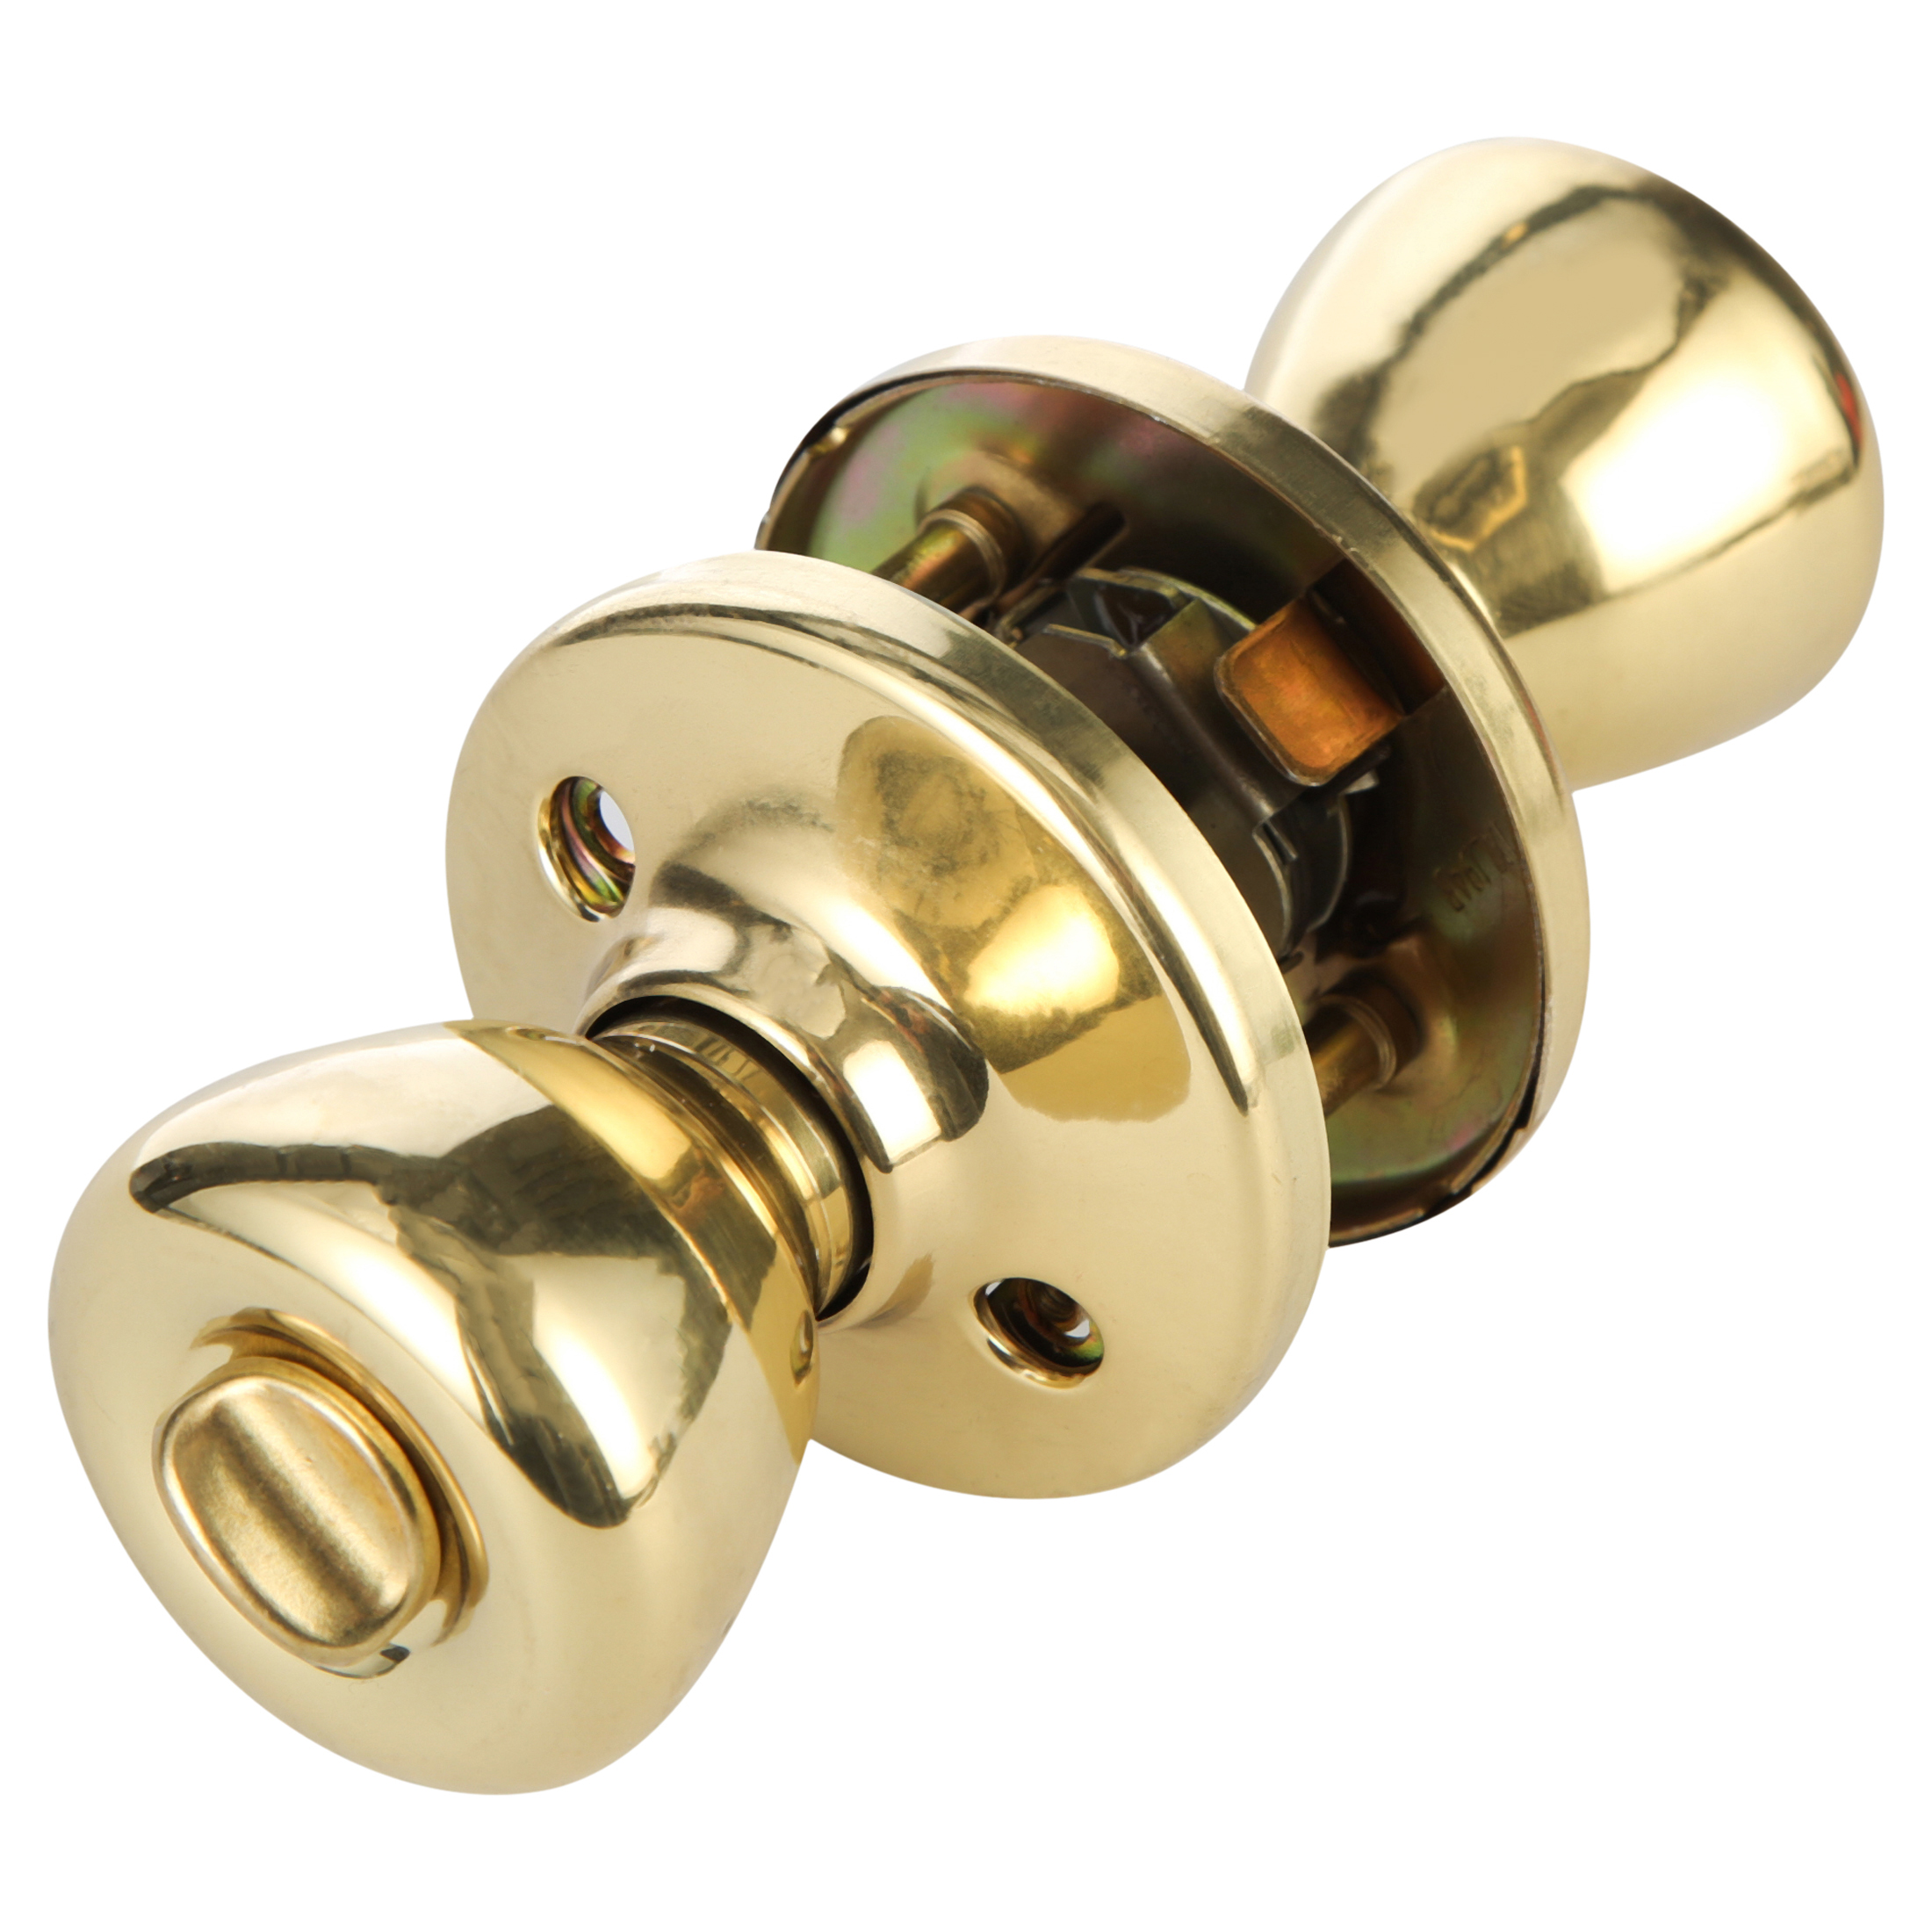 Kwikset 242 Tylo Keyed Entry Knob And Sgl Cyl Deadbolt Project Pack in PB 